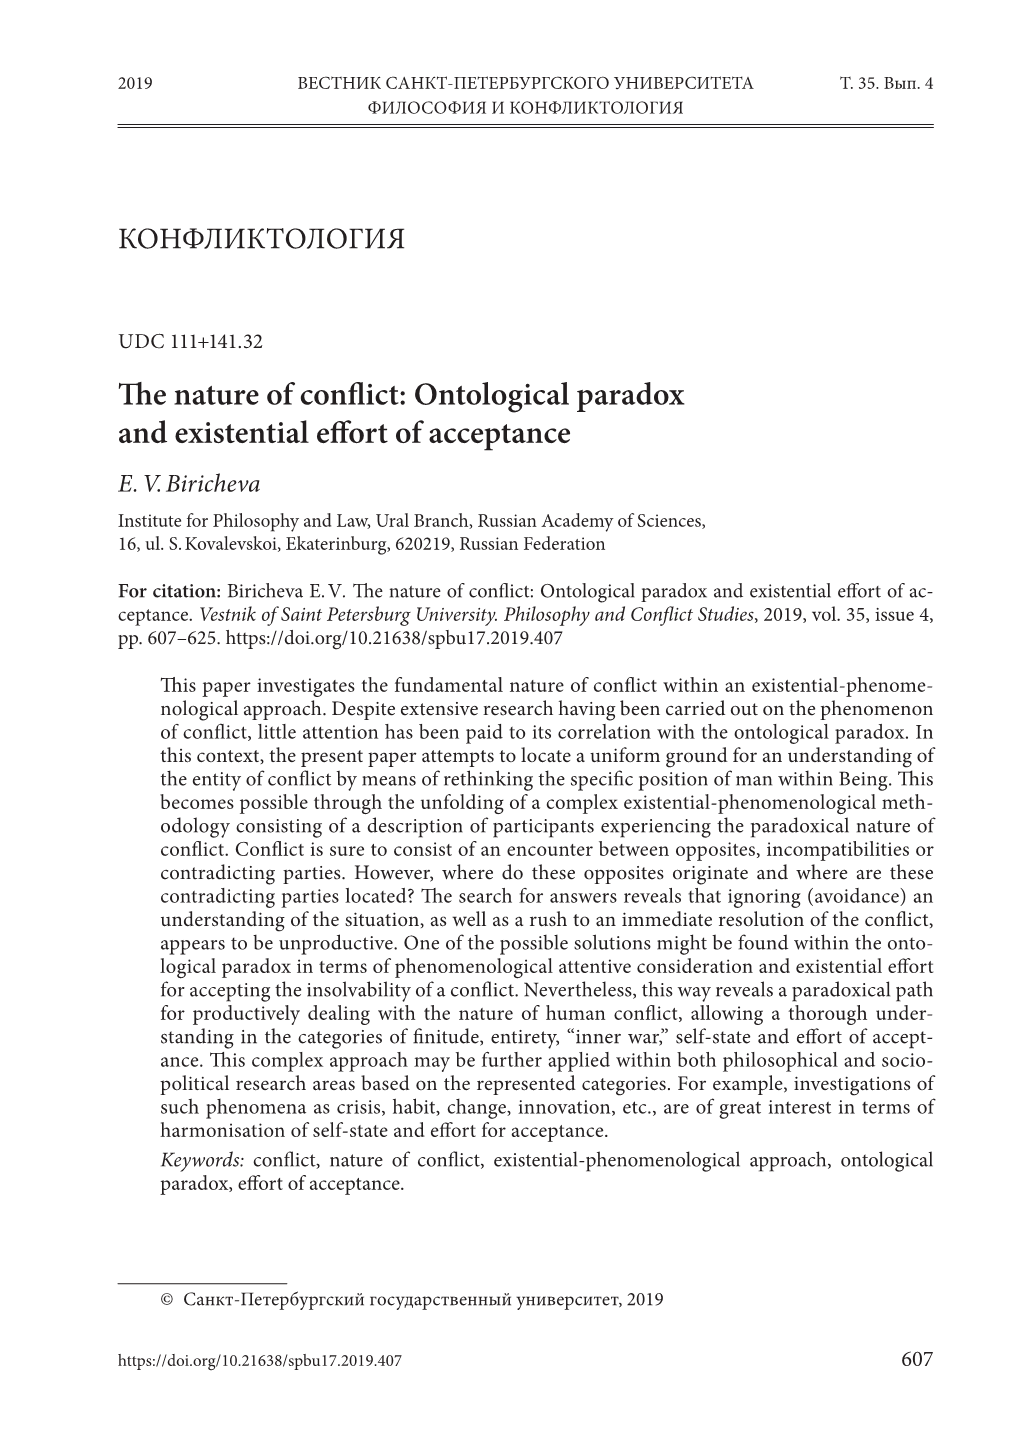 The Nature of Conflict: Ontological Paradox and Existential Effort of Acceptance E